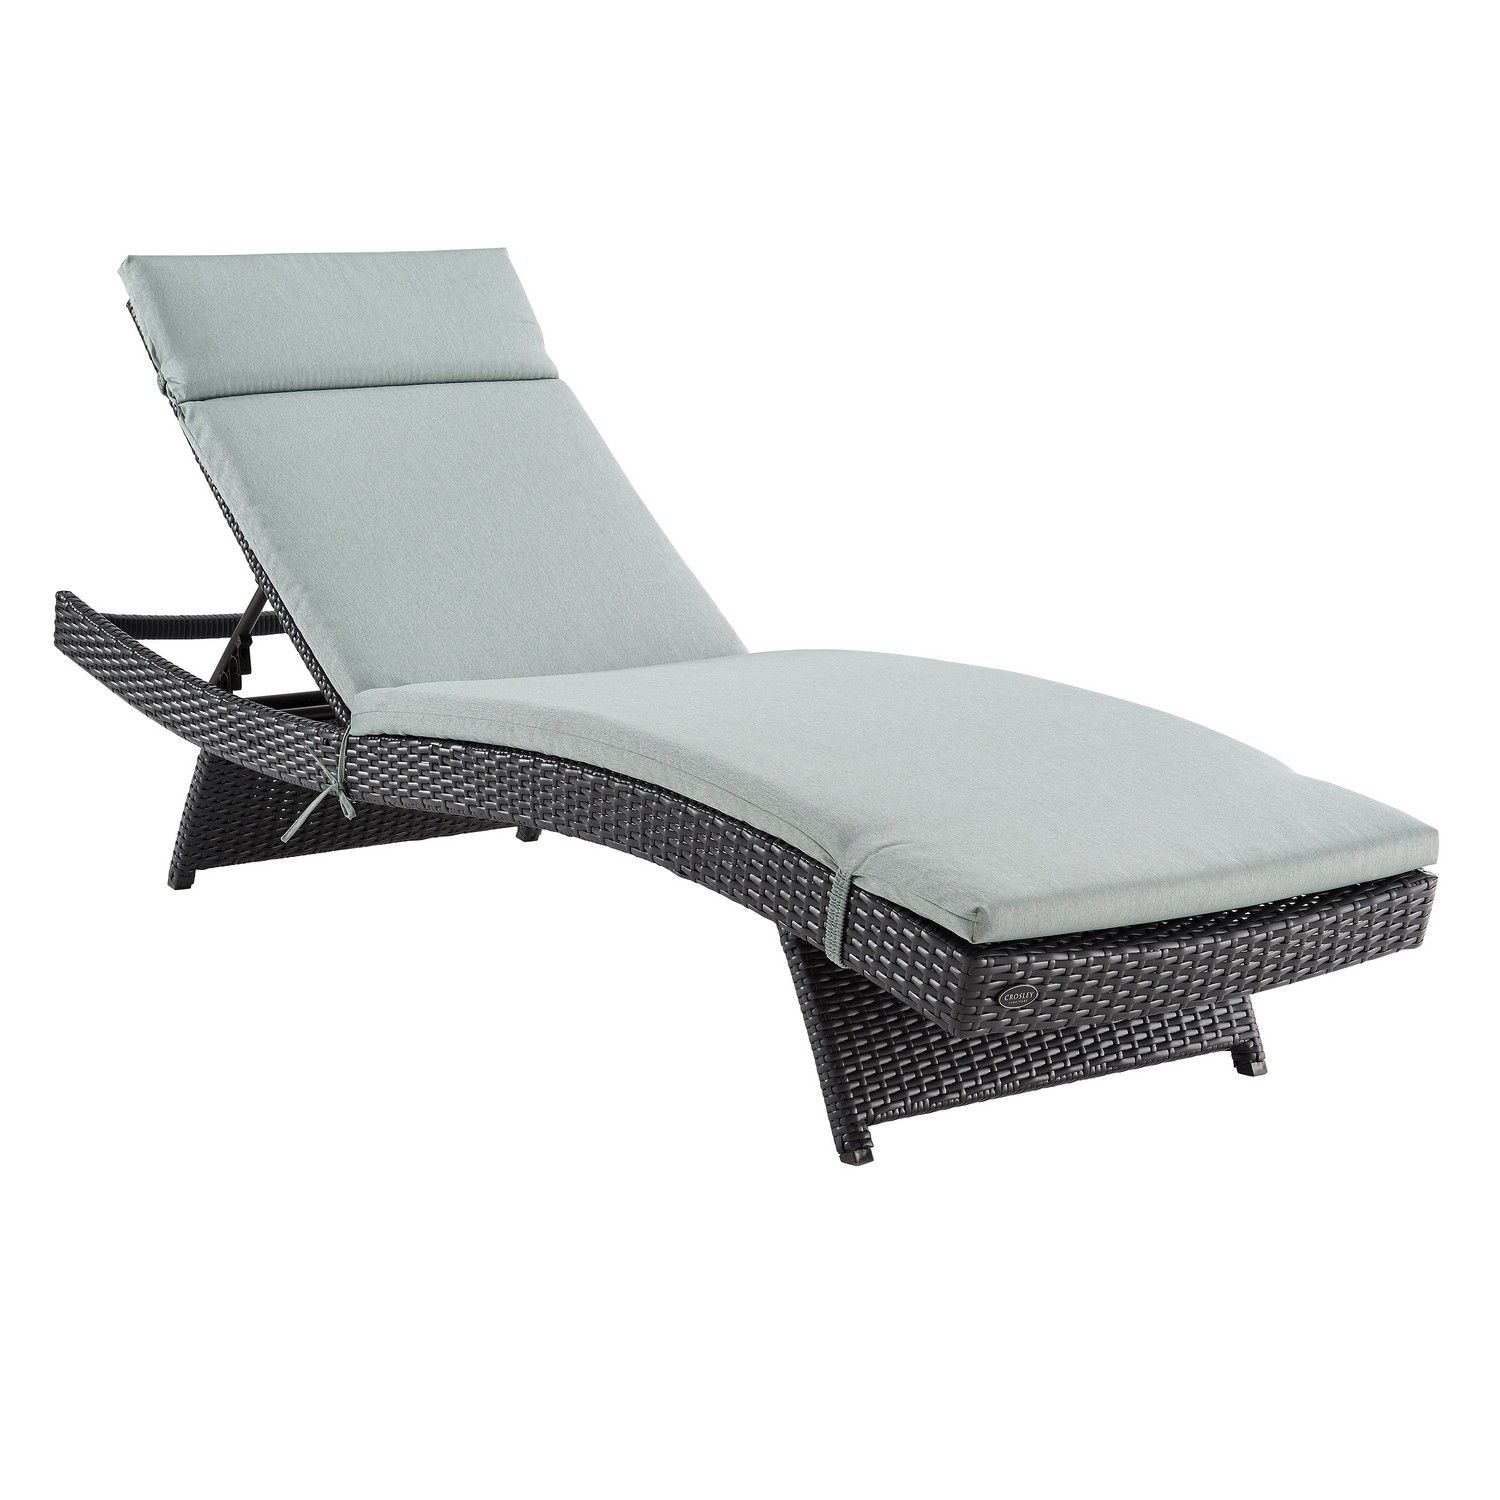 Crosley Biscayne Outdoor Wicker Chaise Lounge - Mist/Brown